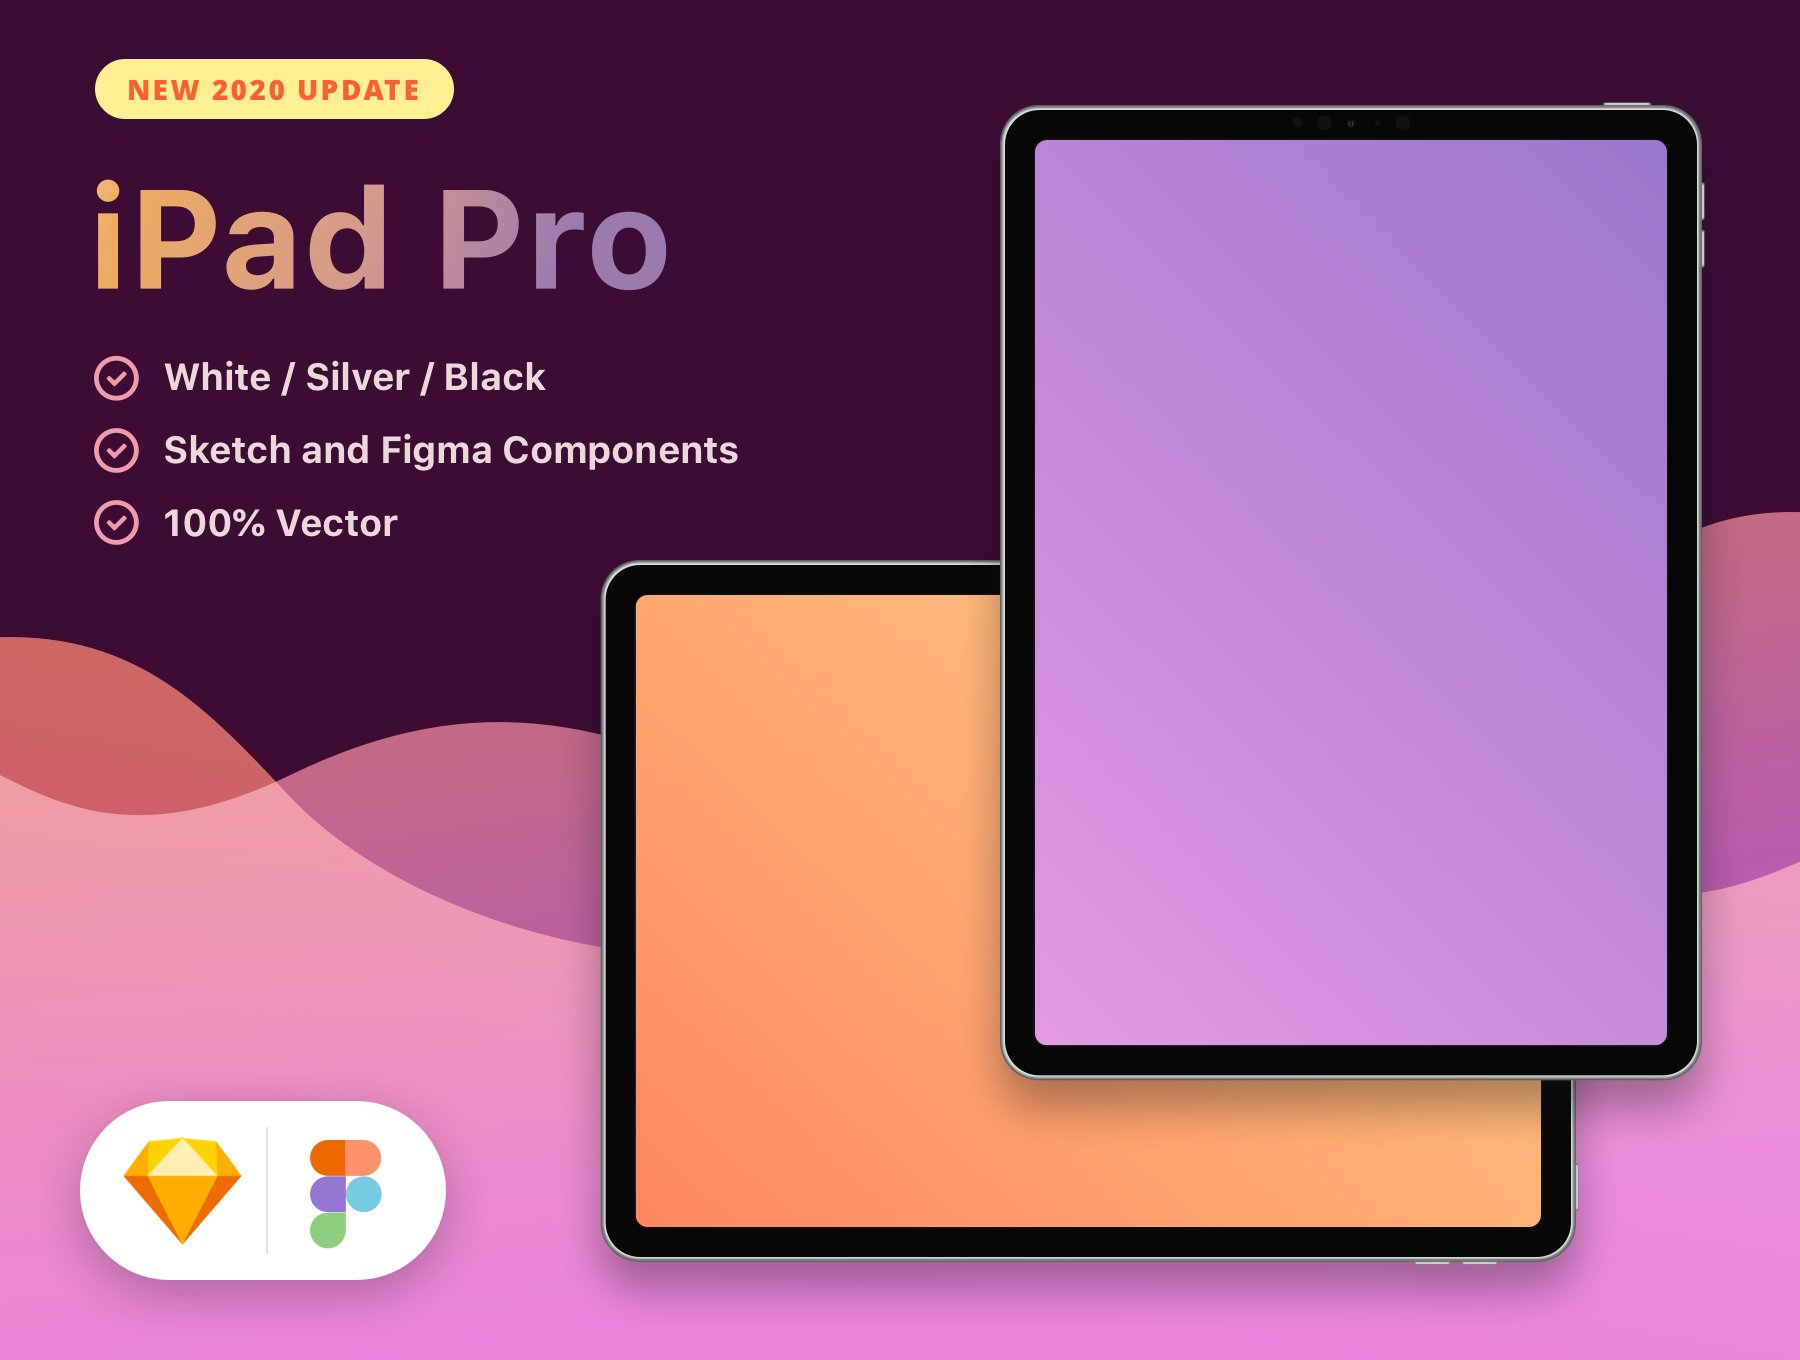 New 2020 iPad Pro preview image.